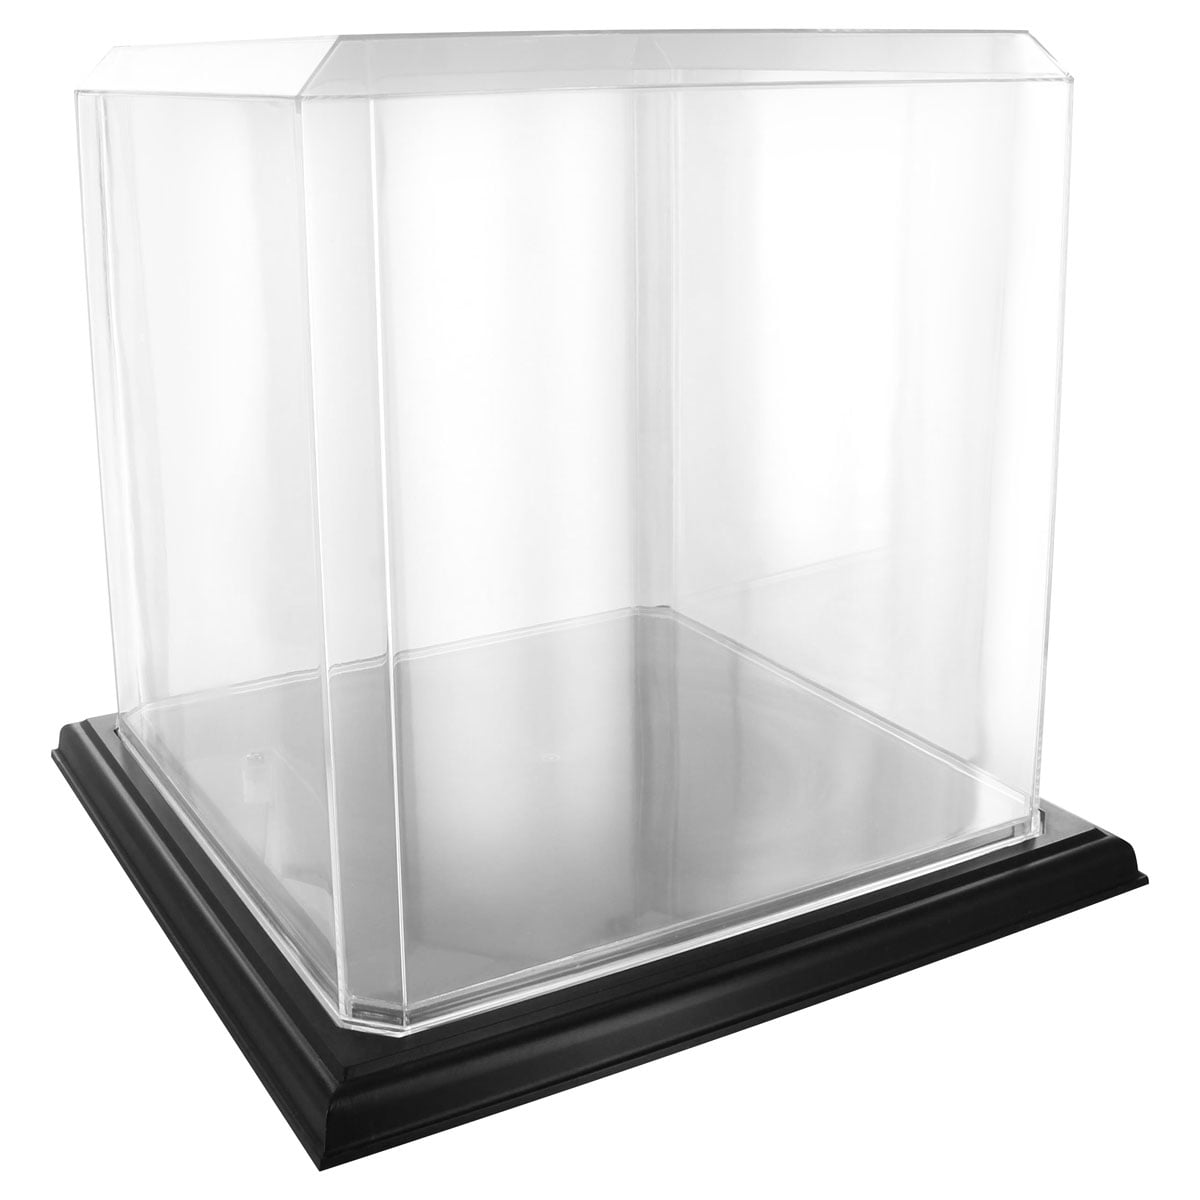 NEW Softball Glass Display Case FREE SHIPPING NCAA BLACK Wood Base with Mirror 